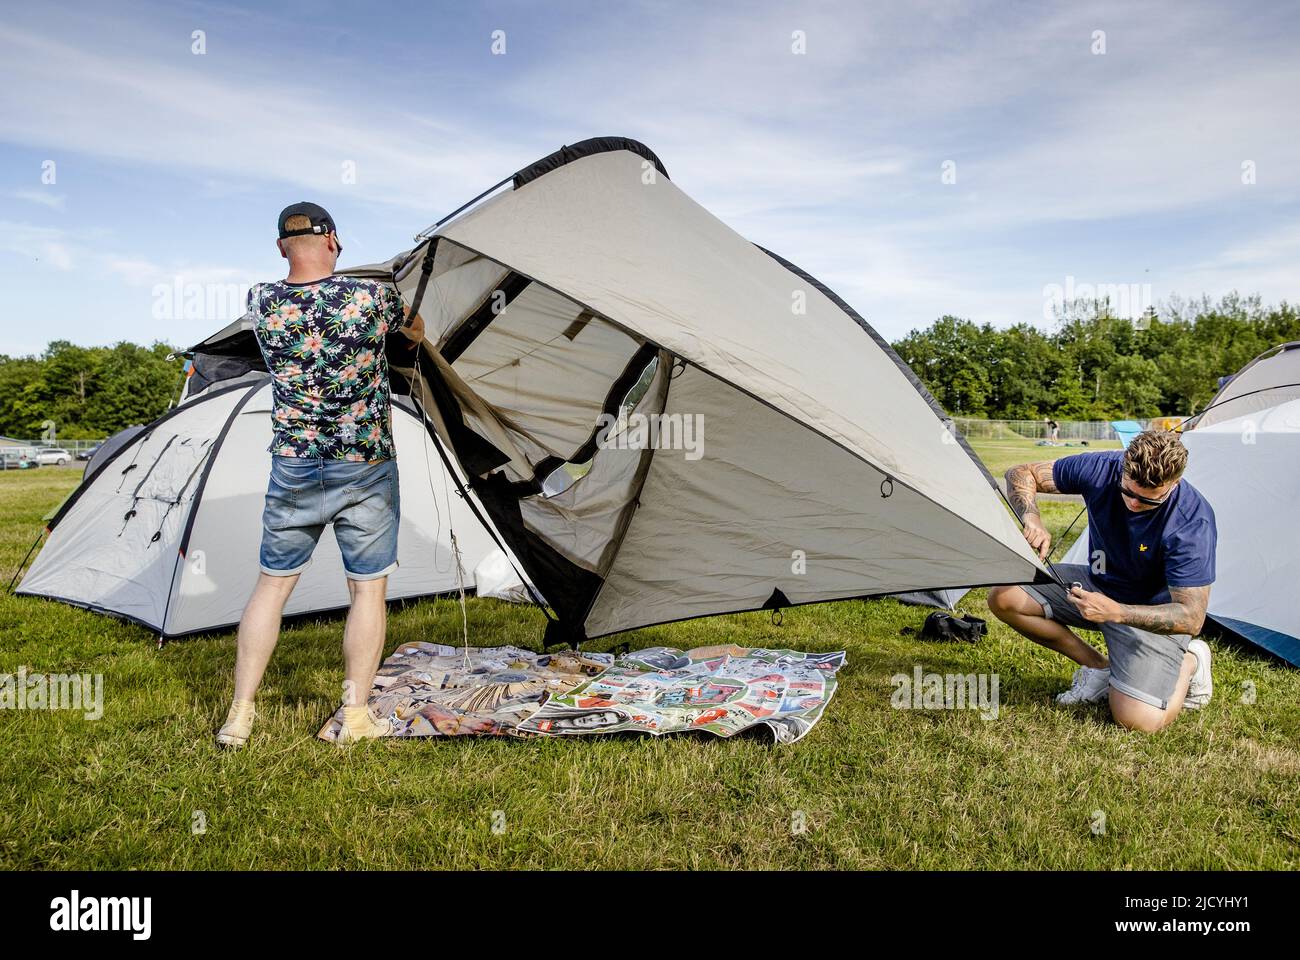 2022-06-16 18:15:19 LANDGRAAF - The first Pinkpop camping guests build a  tent at the camping site. After a two-year delay due to the corona crisis,  the 51st edition of Pinkpop will start